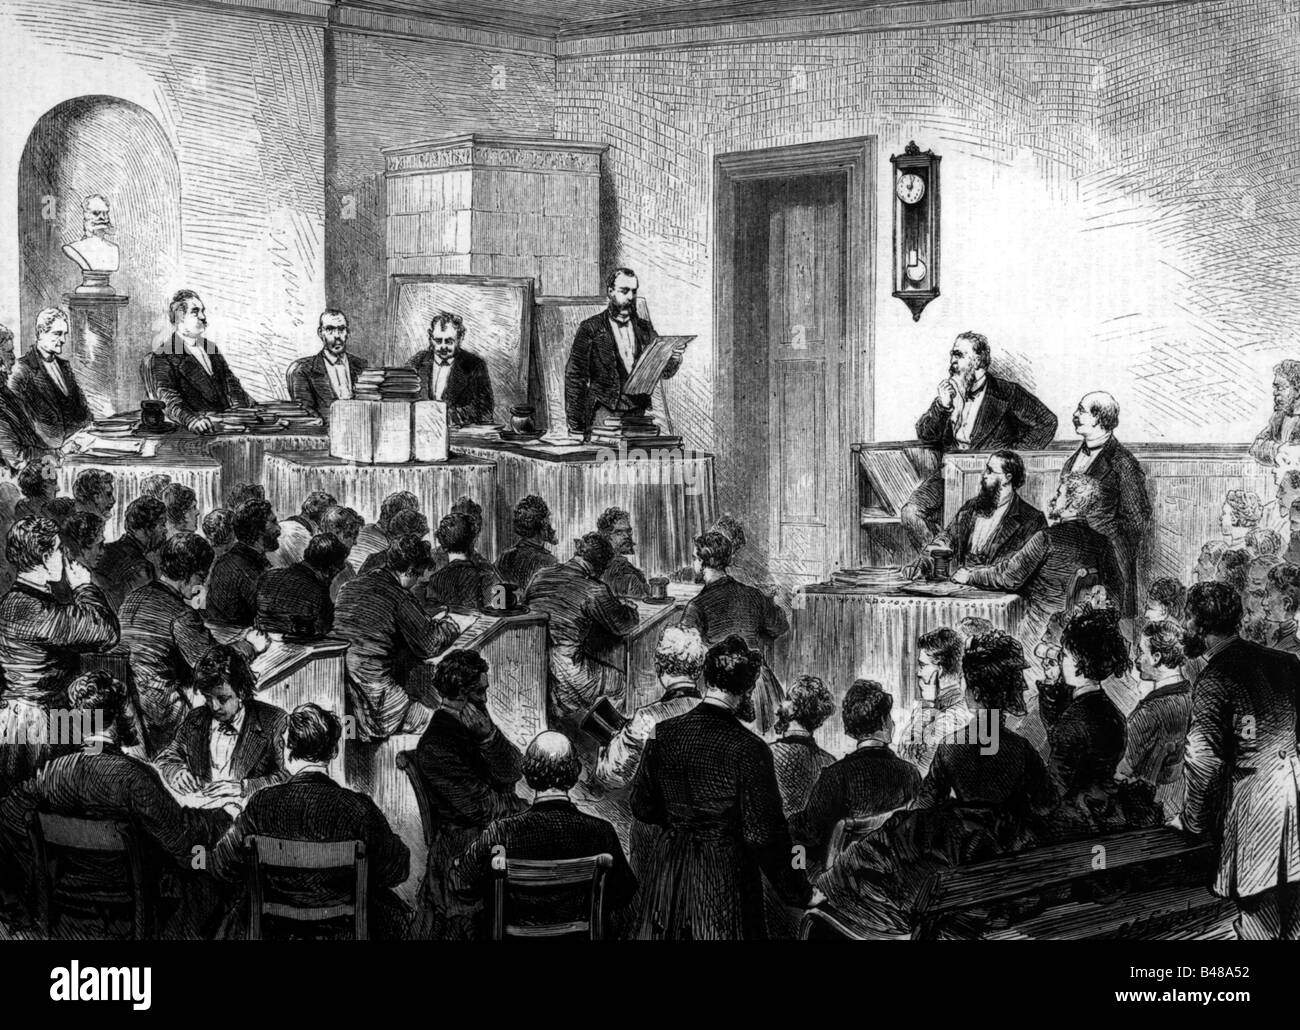 Arnim, Harry Earl, 3.10.1824 - 19.5.1881, German diplomat, court in case of office, 1875, reading of indictment by public prosecutor Hermann Tessendorf, wood engraving after drawing von Lüders, Stock Photo